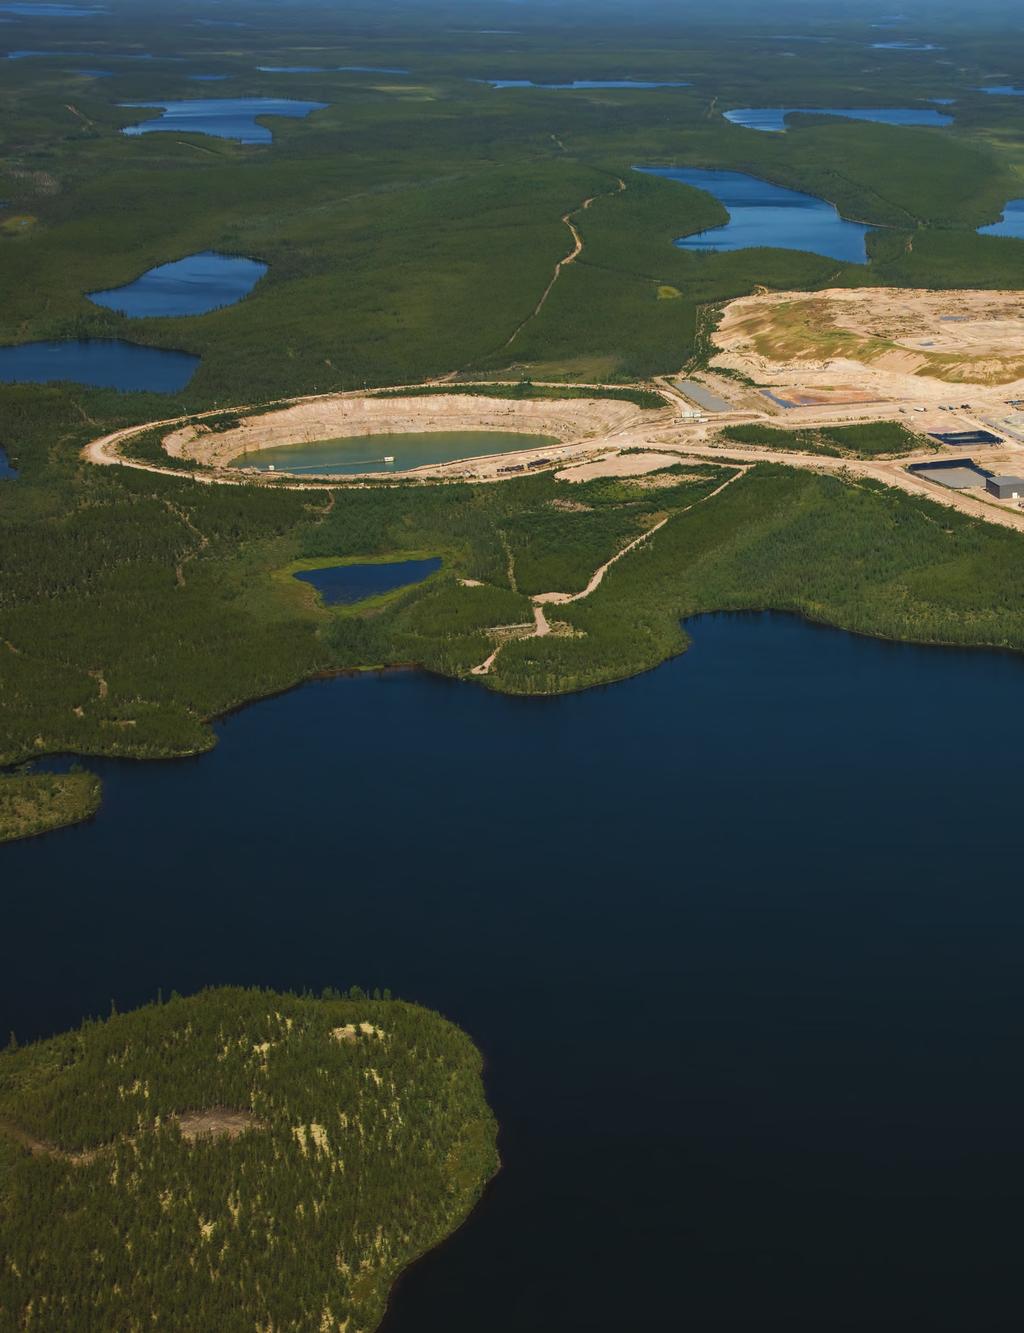 McClean Lake Located over 700 kilometres northeast of Saskatoon, AREVA s McClean Lake site is comprised of several uranium mines and the newest, most technologically advanced uranium mill in the